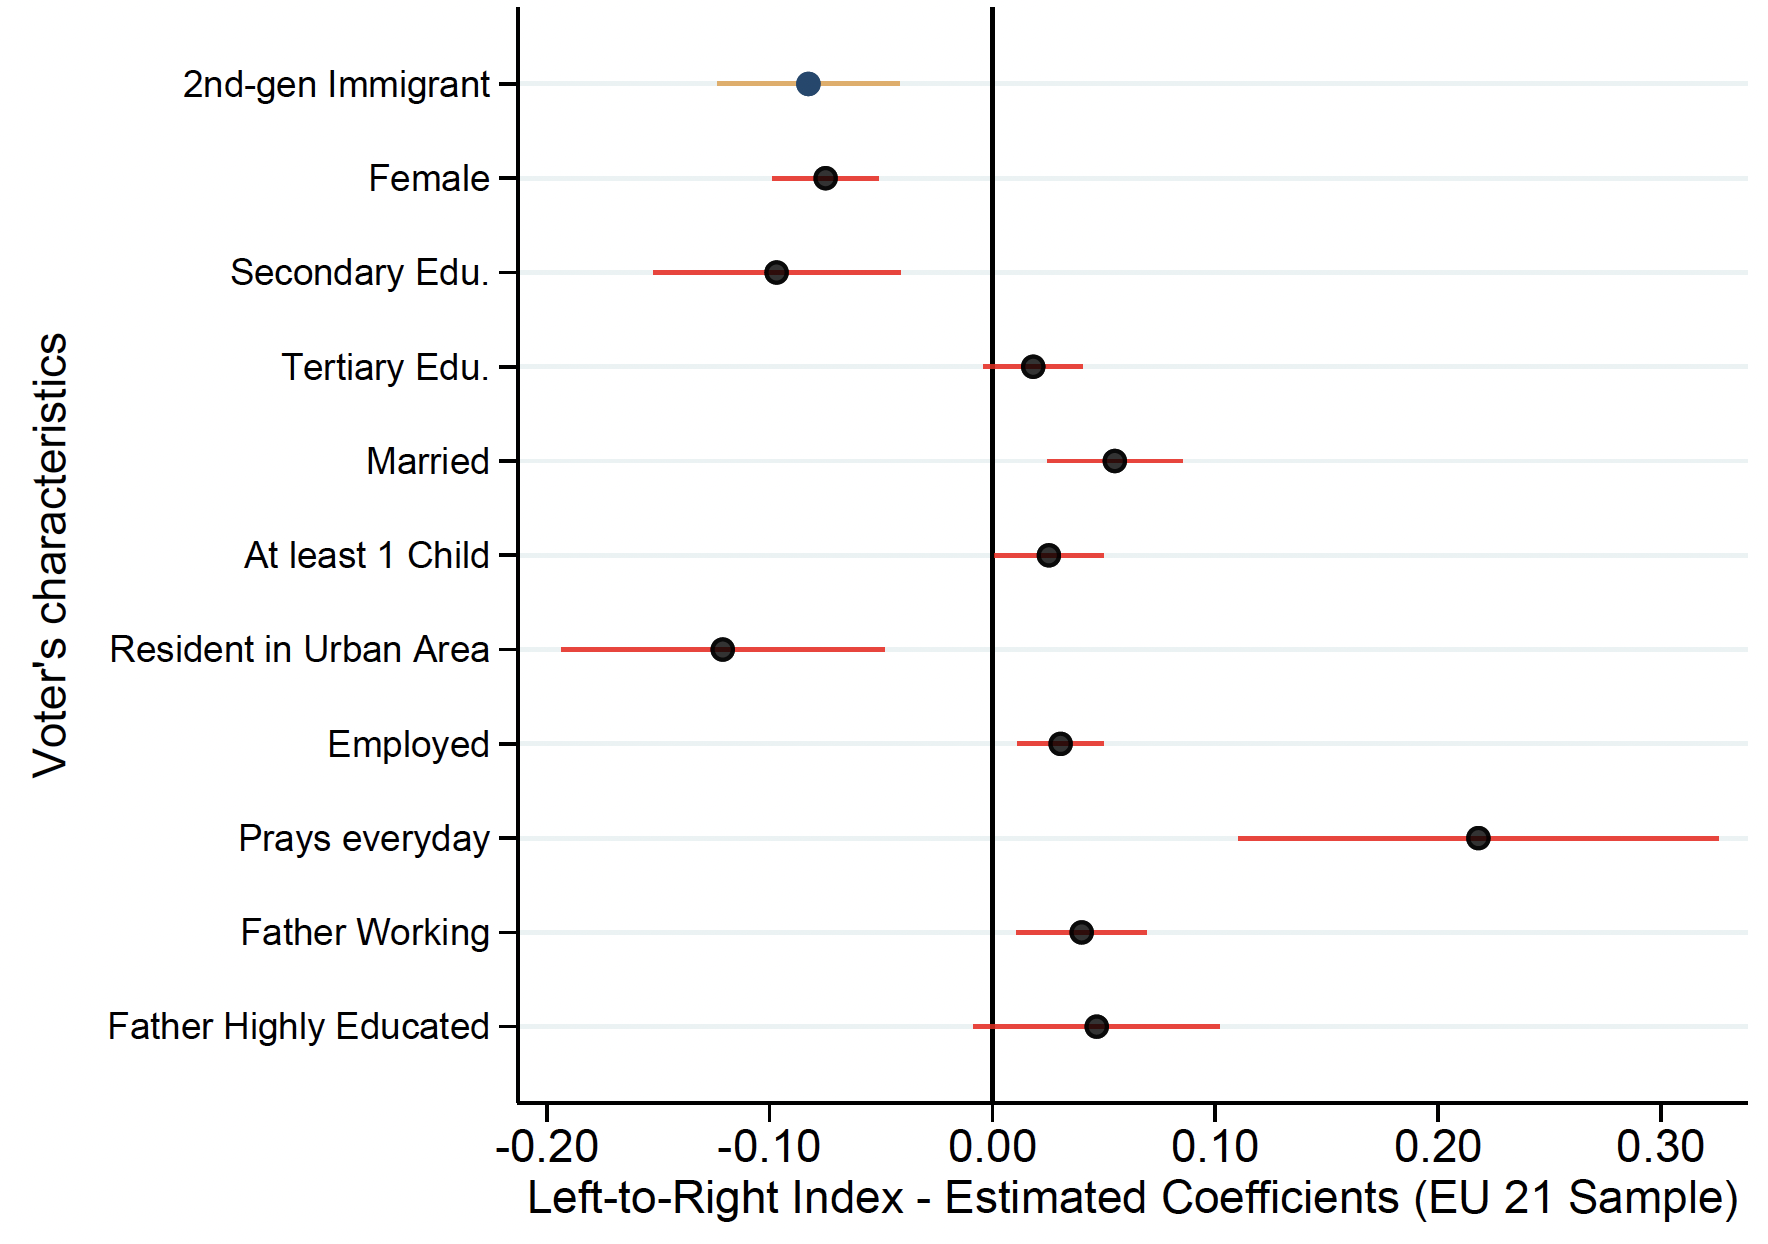 Figure 3 Migrant to native difference in left-to-right voting